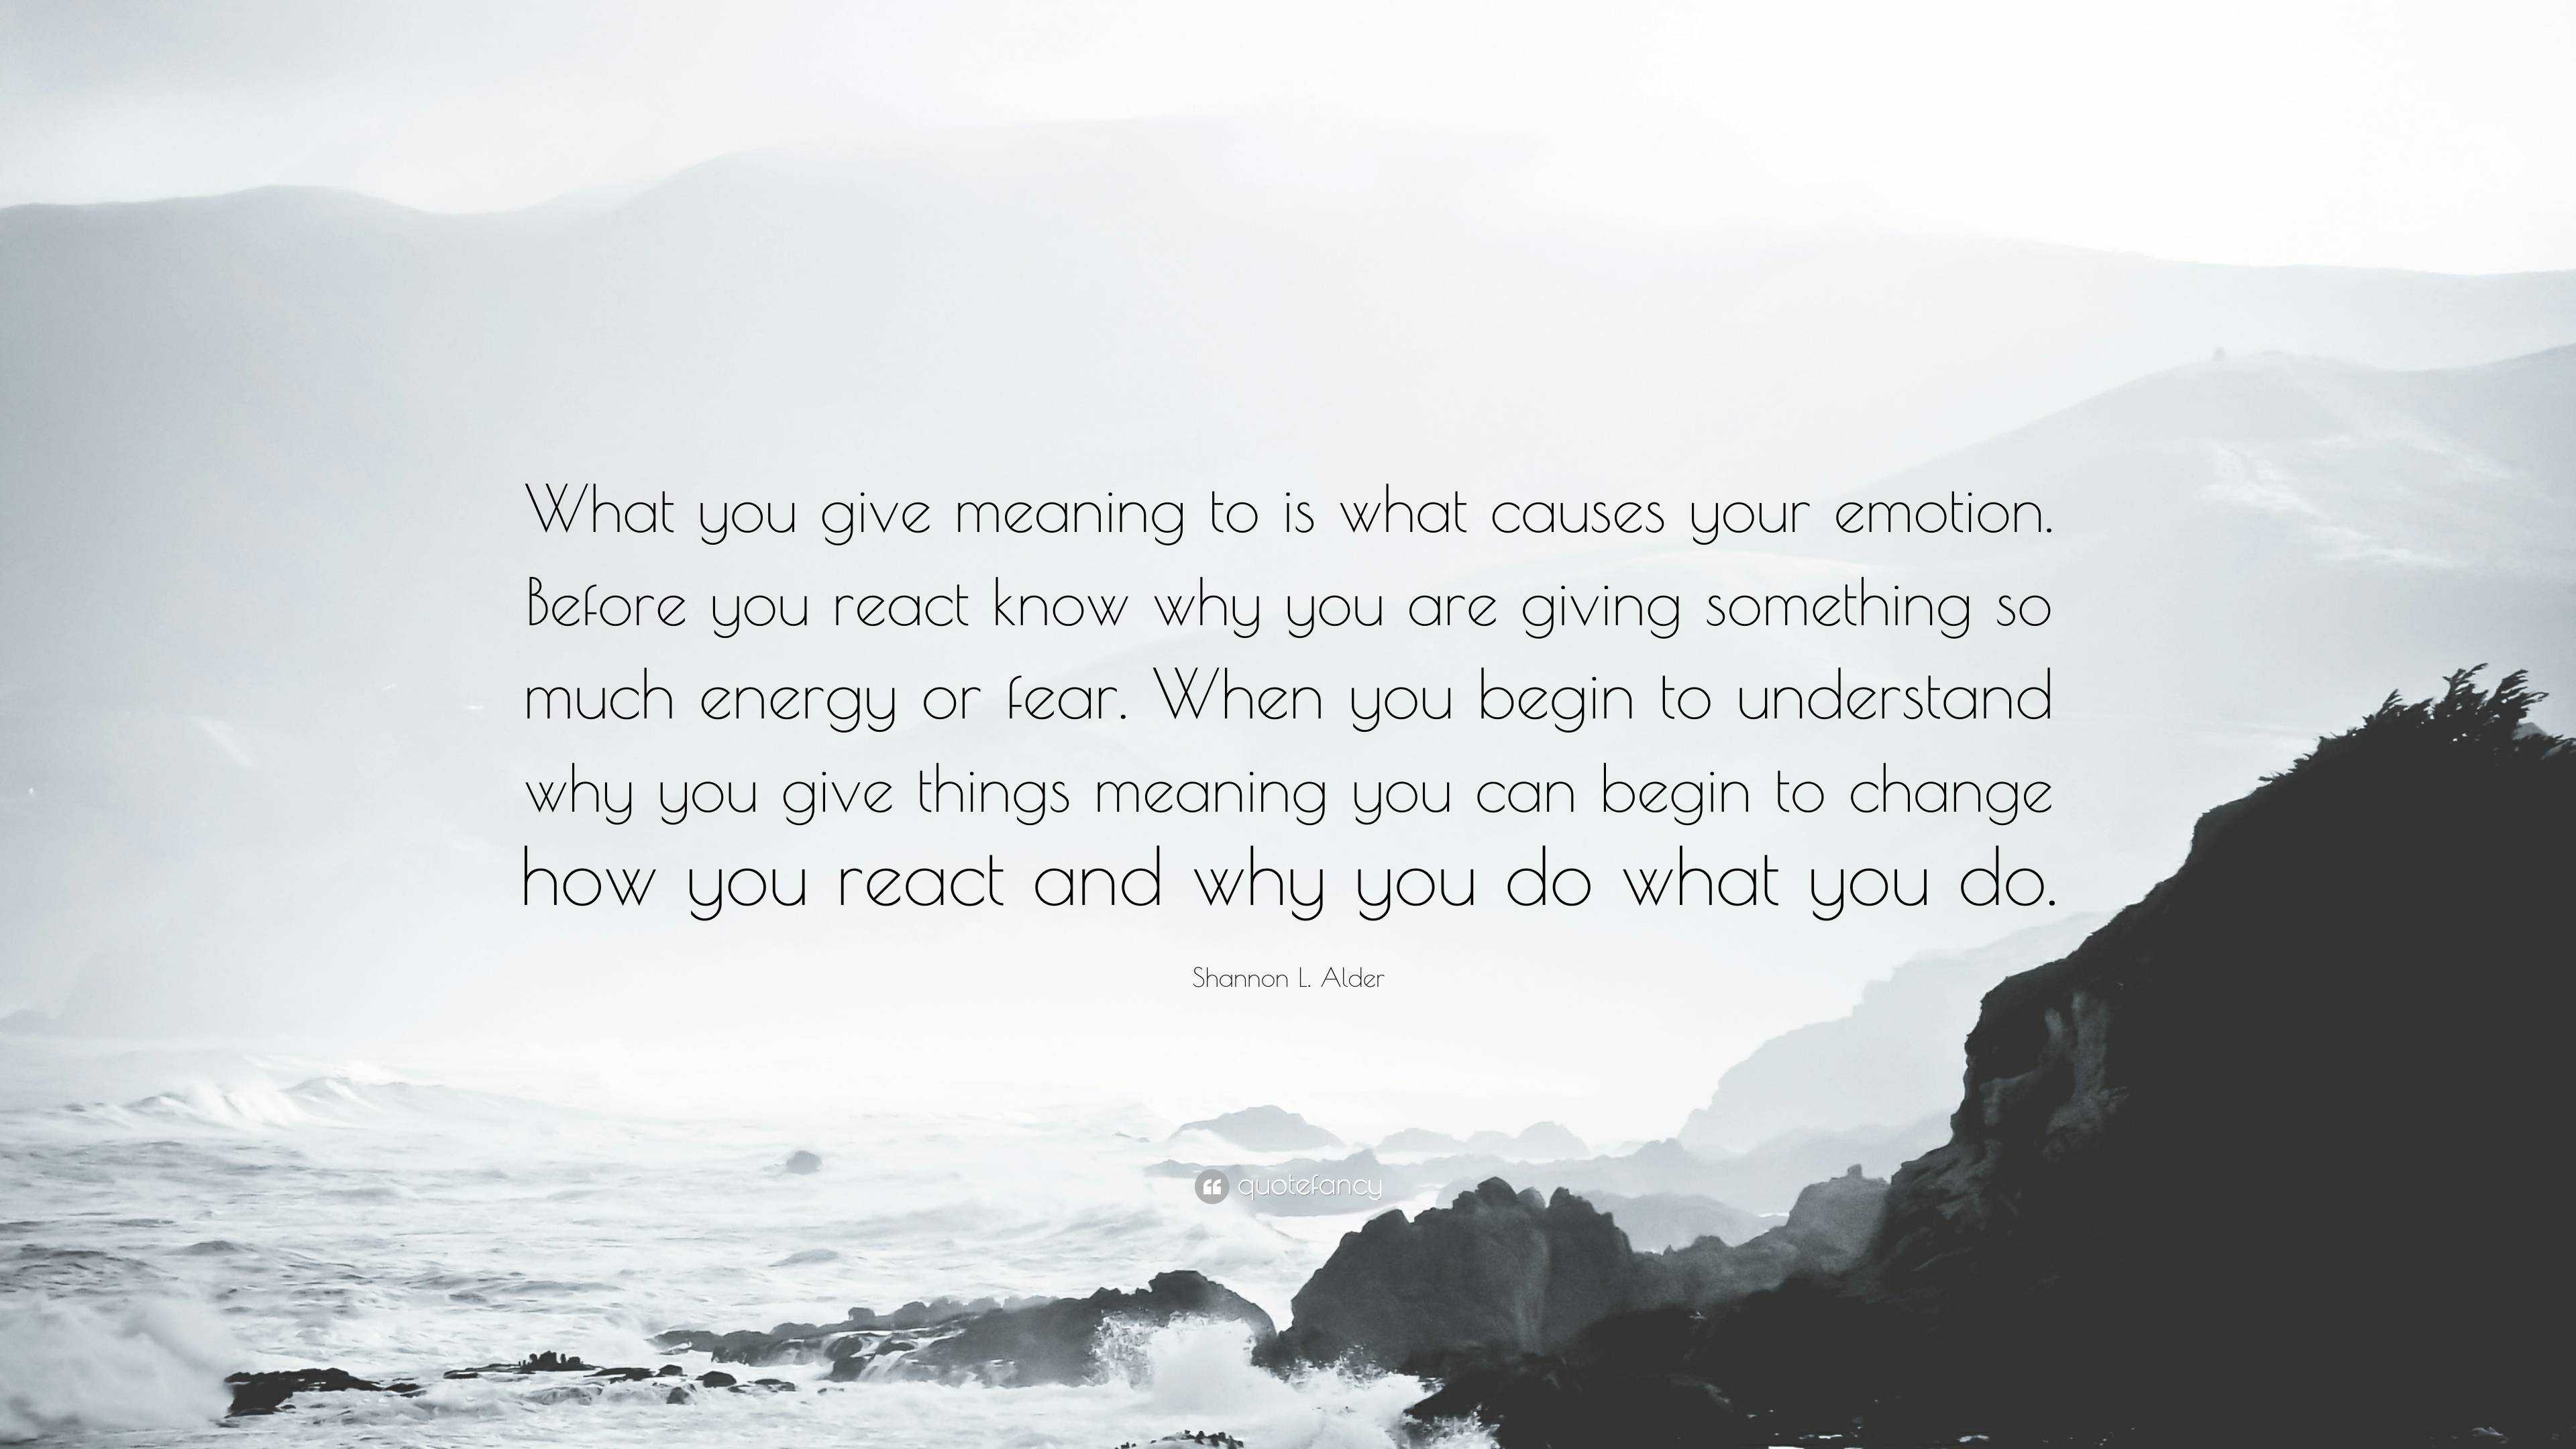 Shannon L Alder Quote What You Give Meaning To Is What Causes Your Emotion Before You React Know Why You Are Giving Something So Much Energy